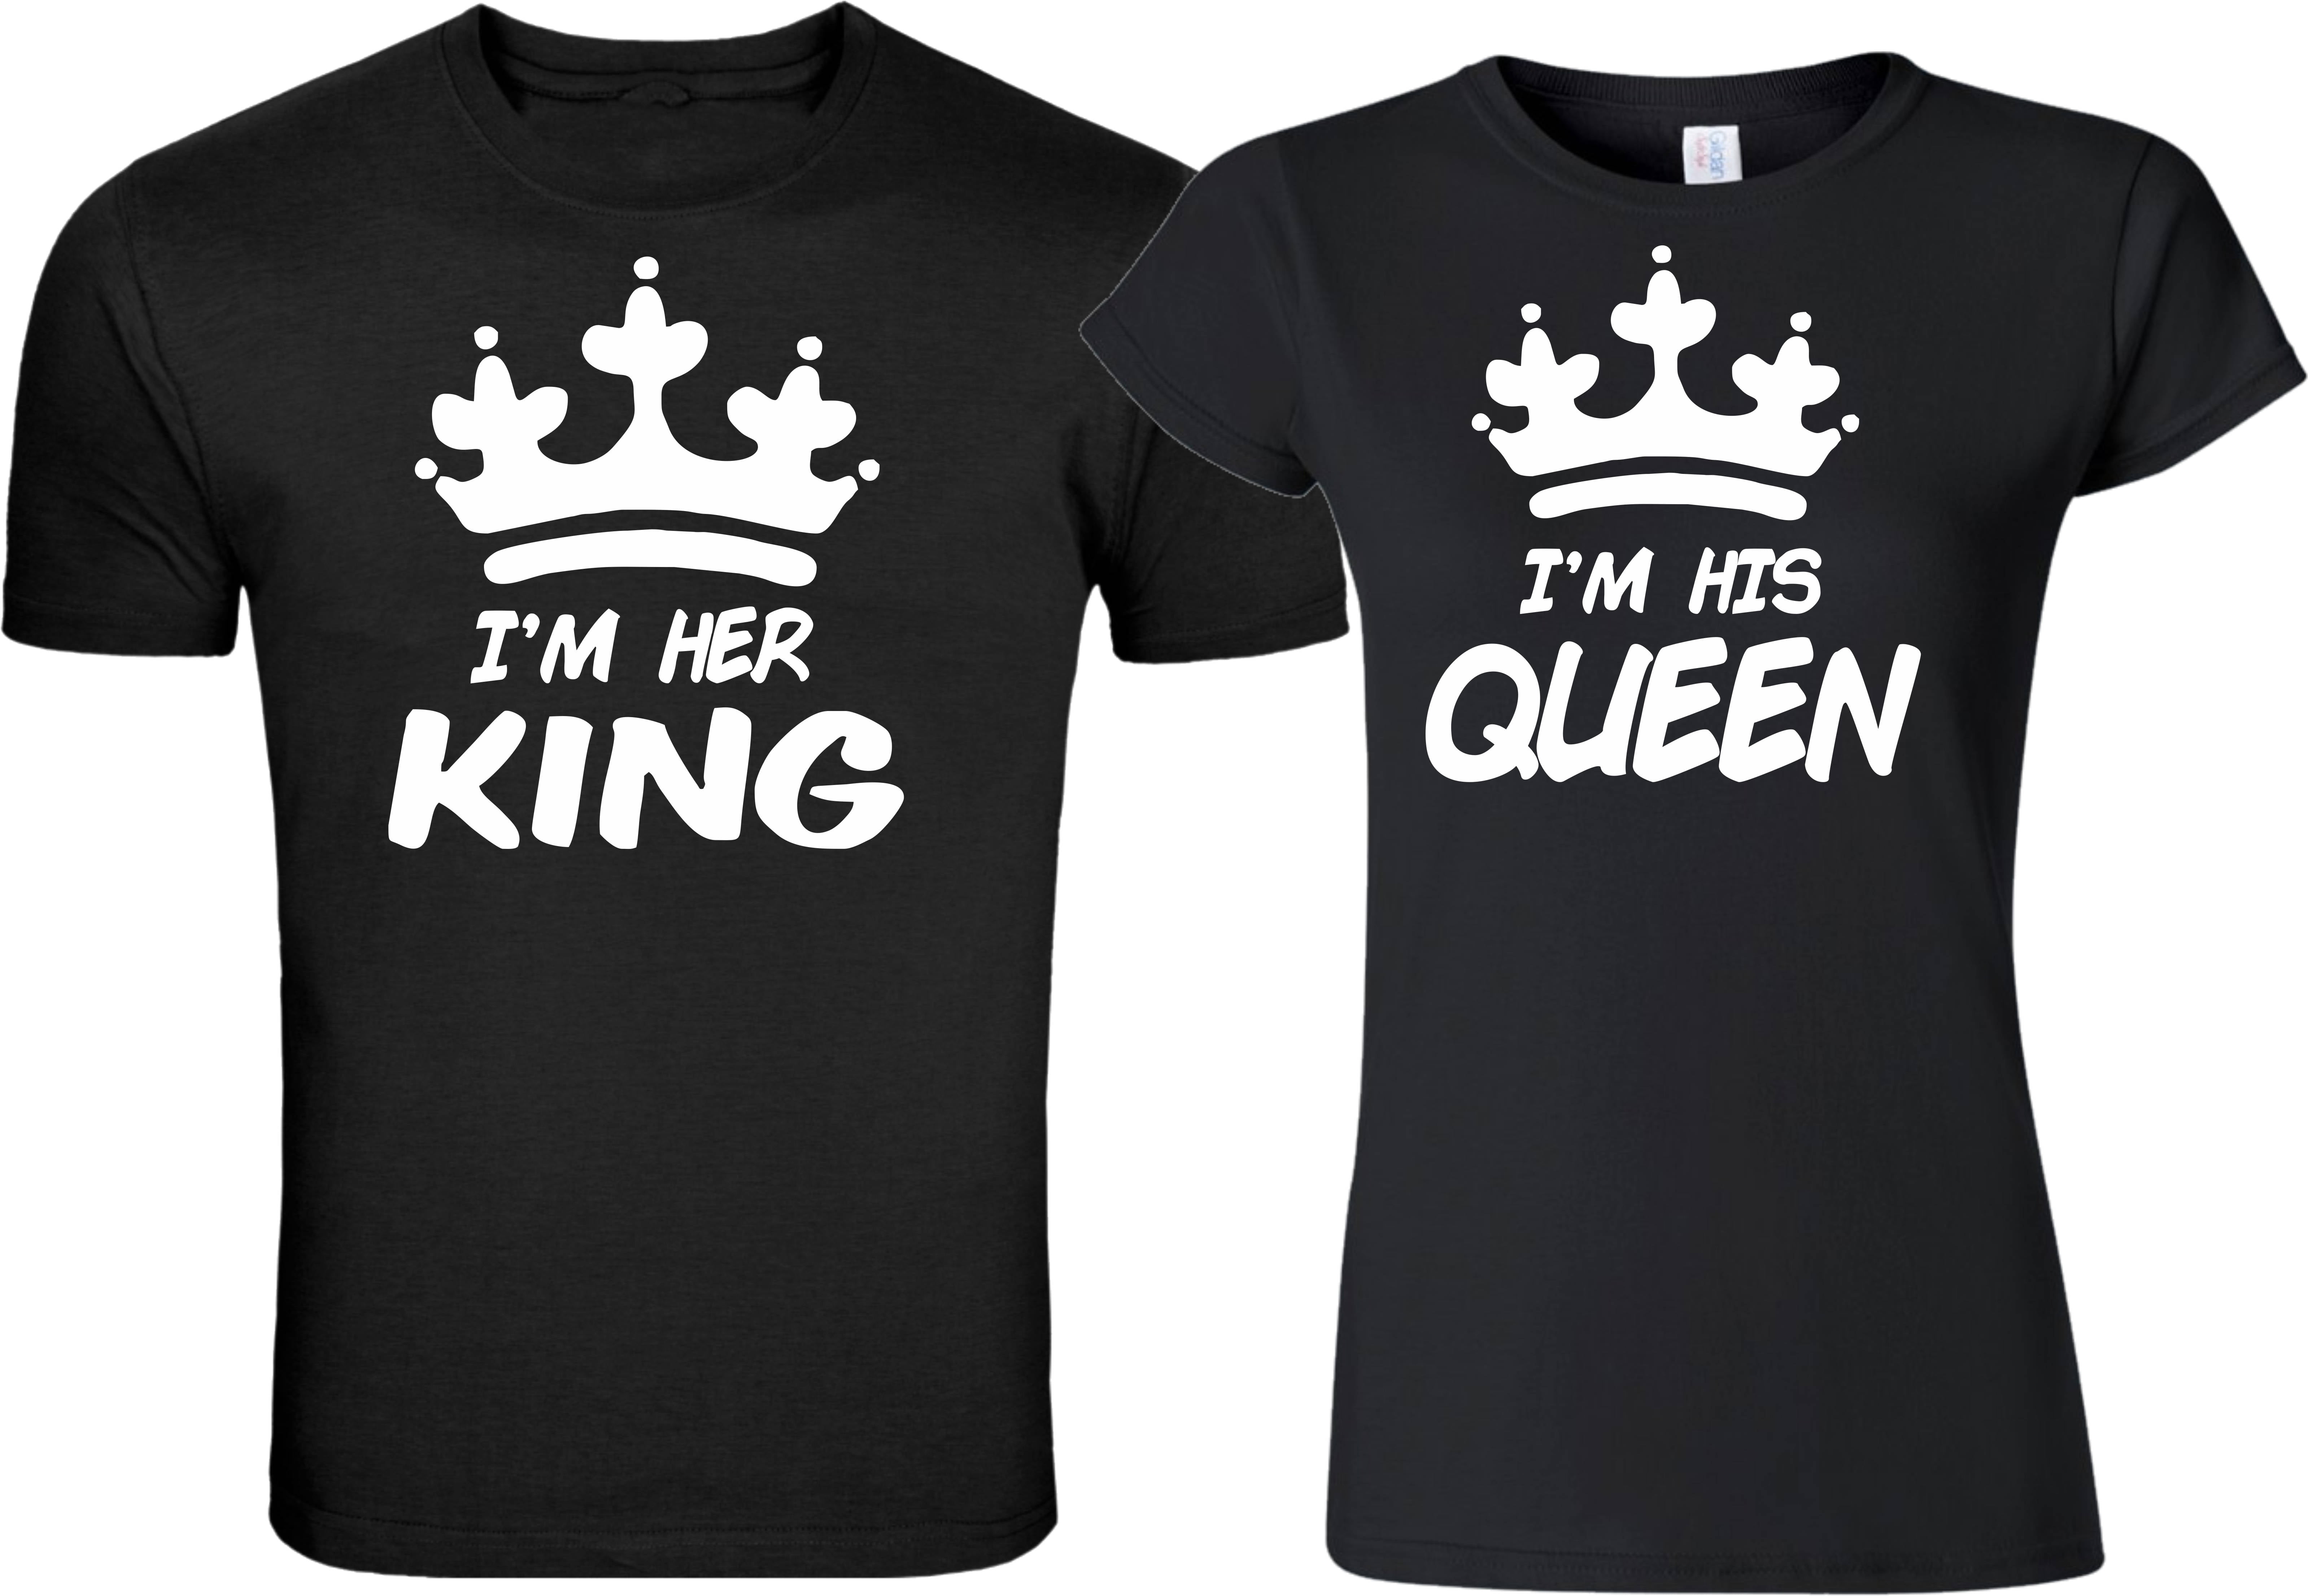 Her King Print Design Unique Custom Print Pillowcases Gifts Couple His Queen 